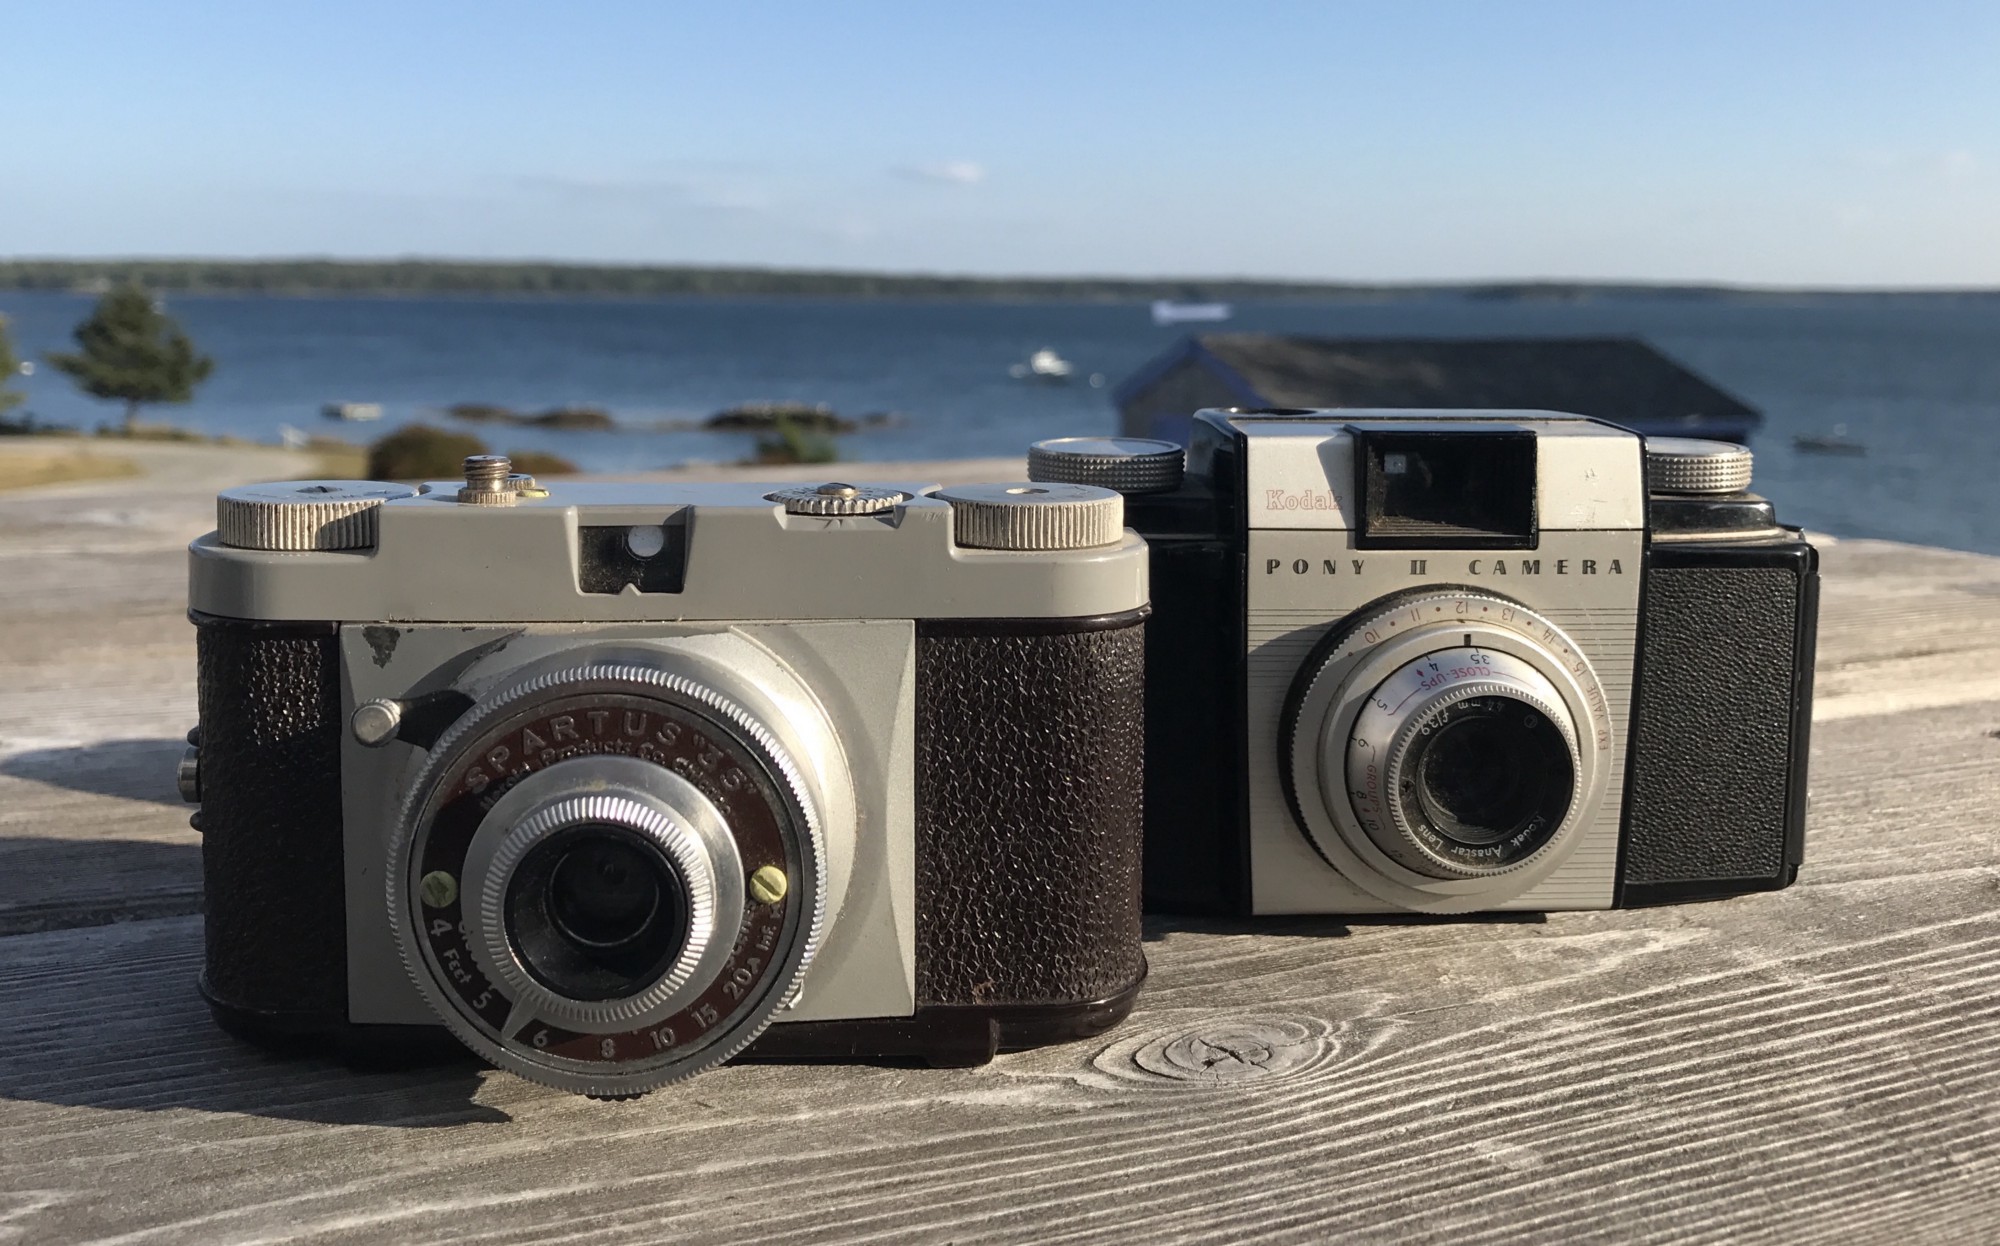 What old cameras can teach us about designing better digital experiences